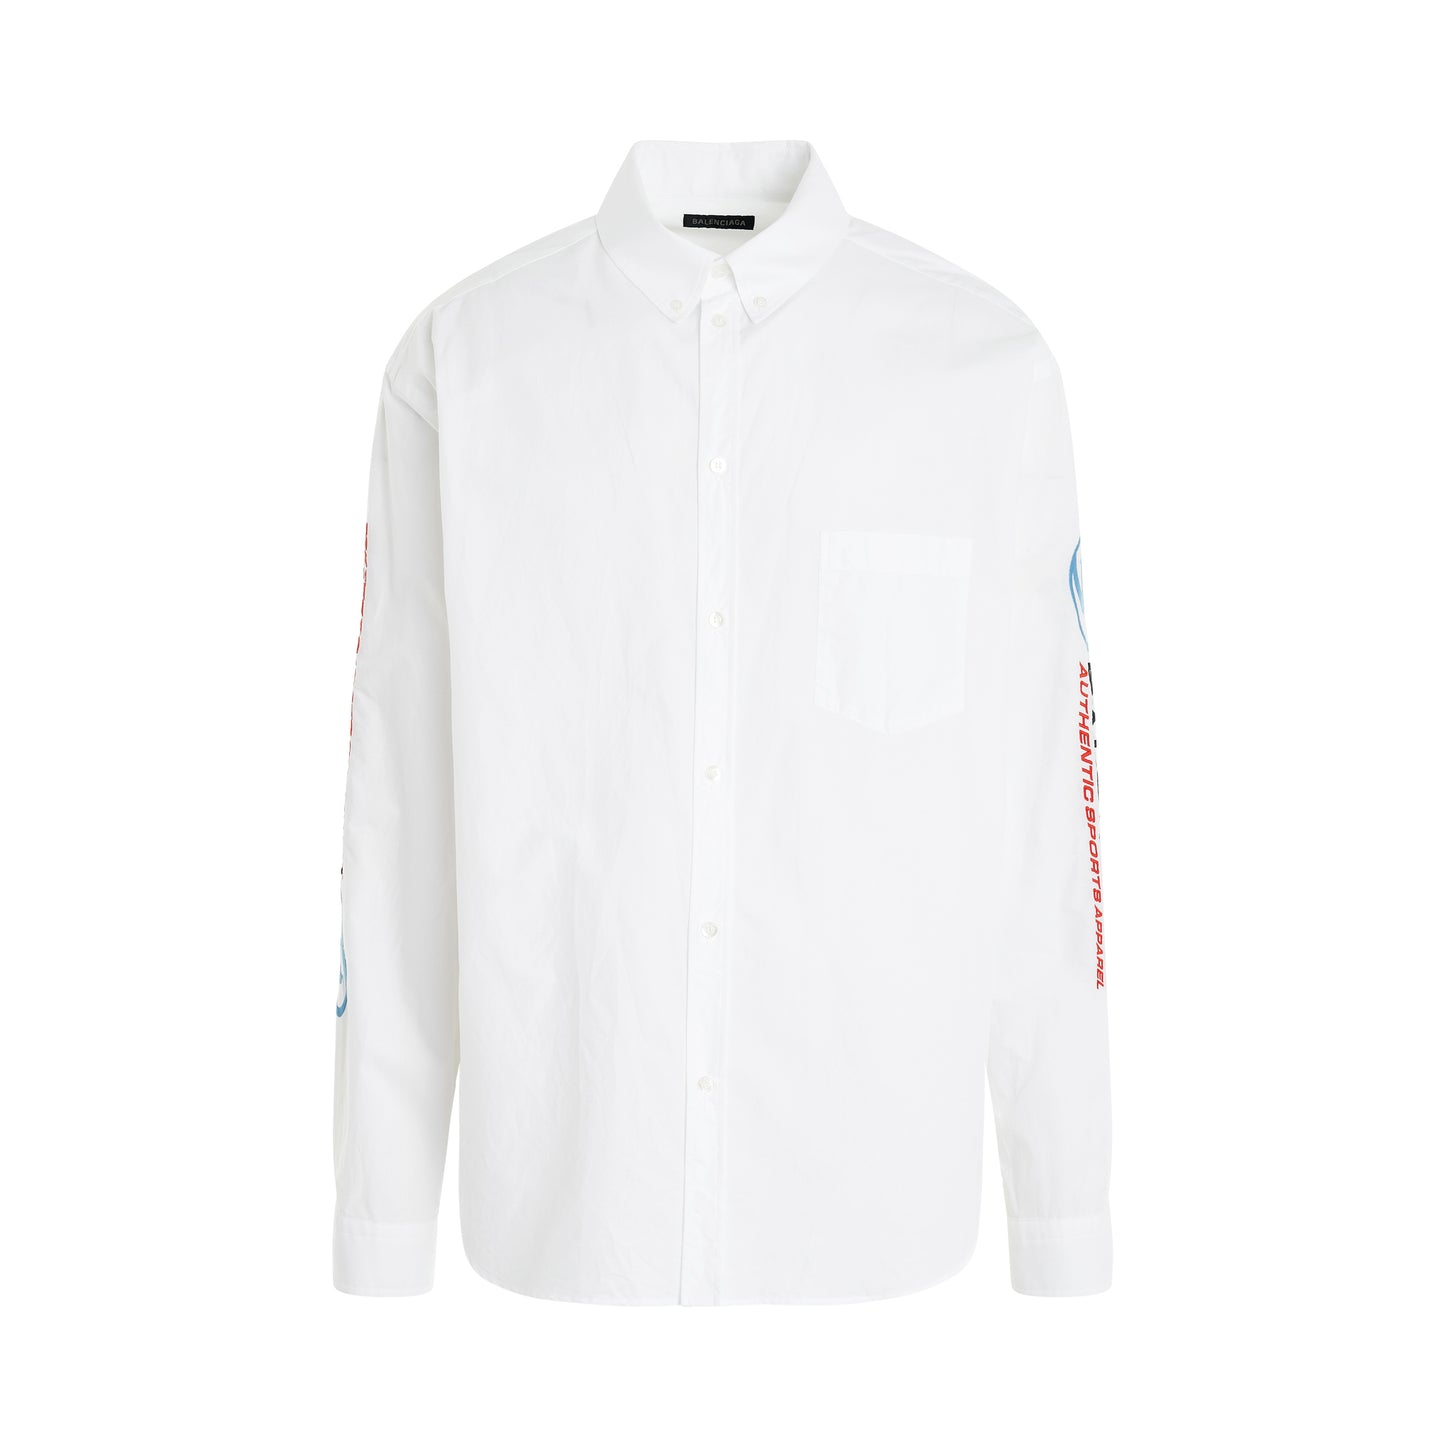 Long-Sleeve Large Fit Shirt in White